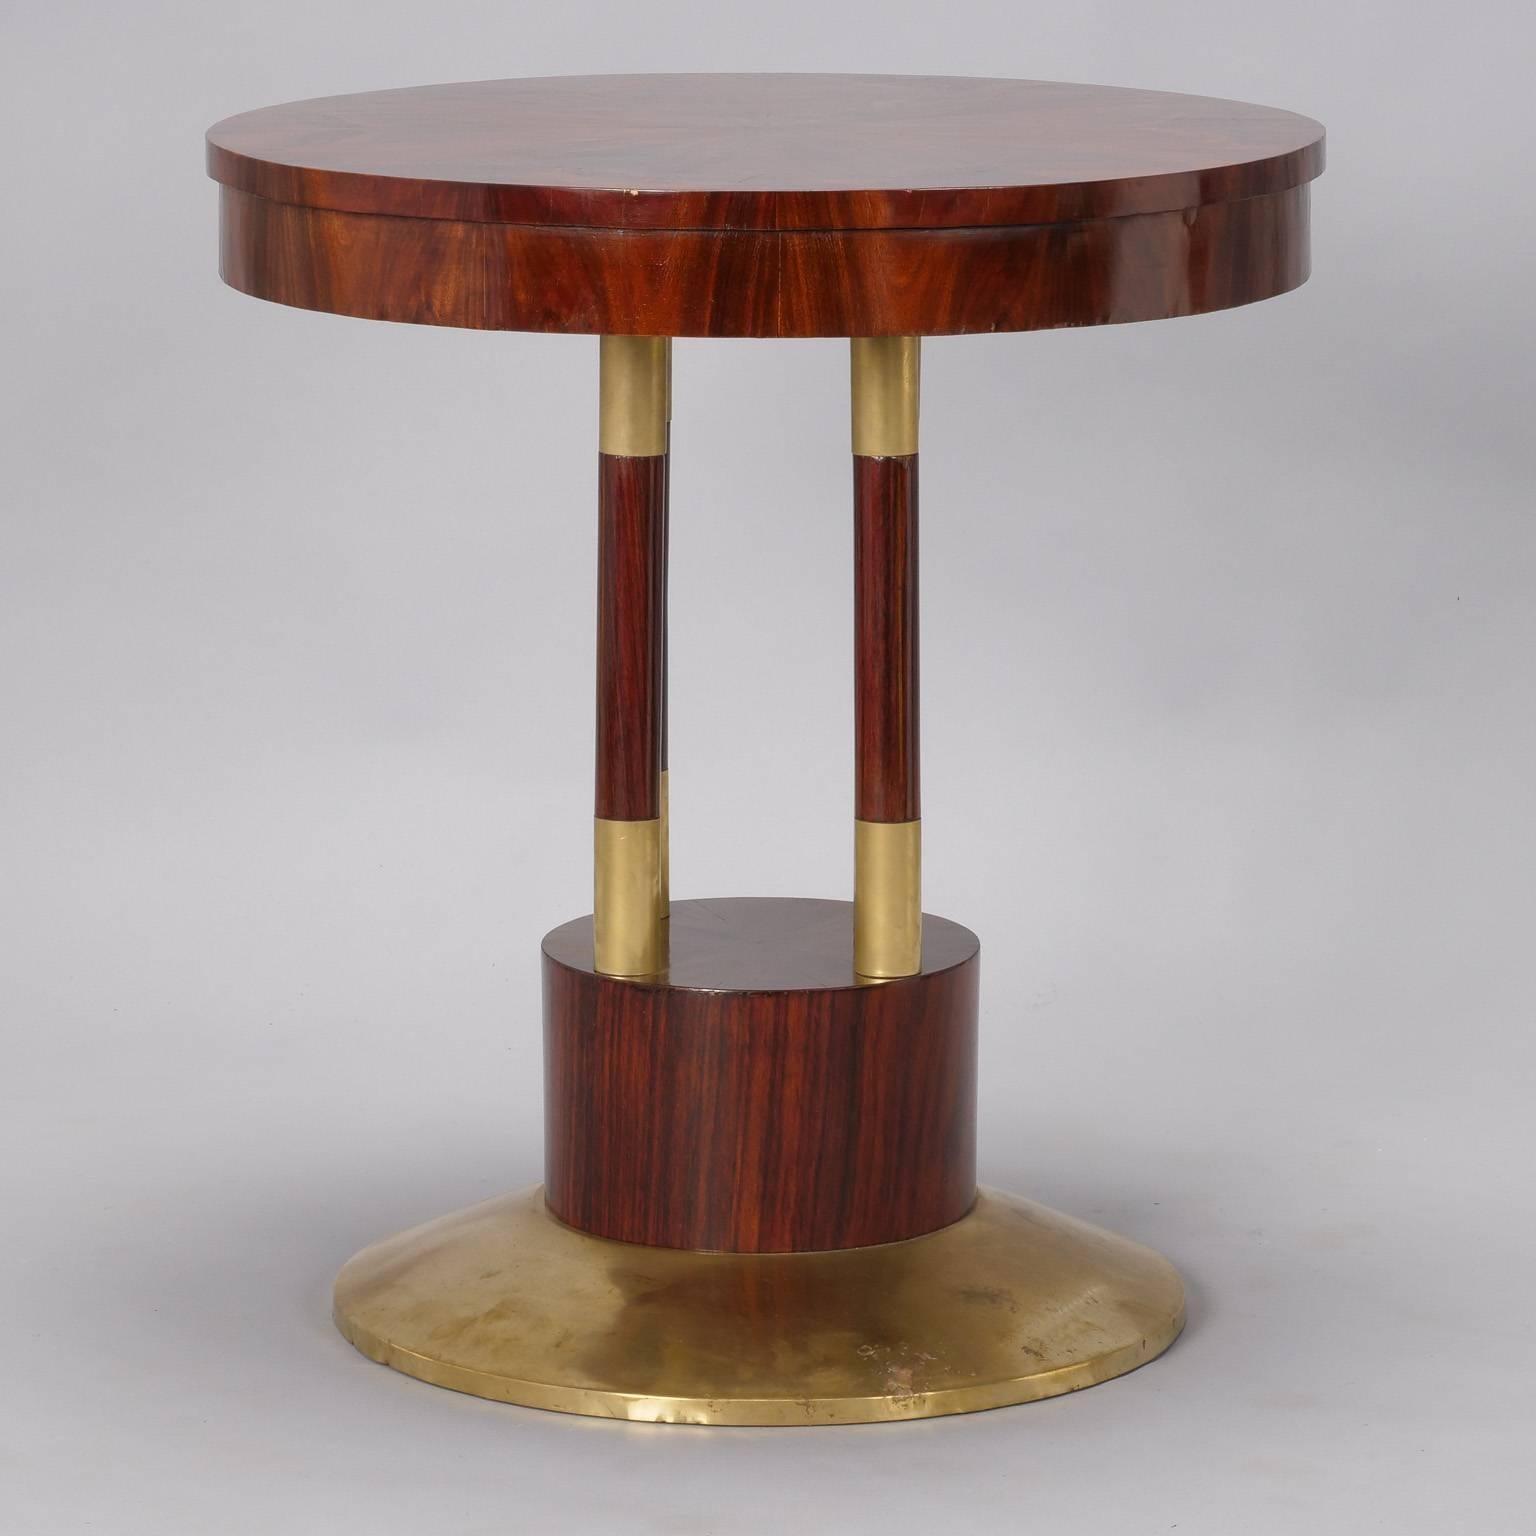 Round pedestal center table has solid brass base and beautifully grained rosewood top, circa 1910. Four support columns trimmed in brass.